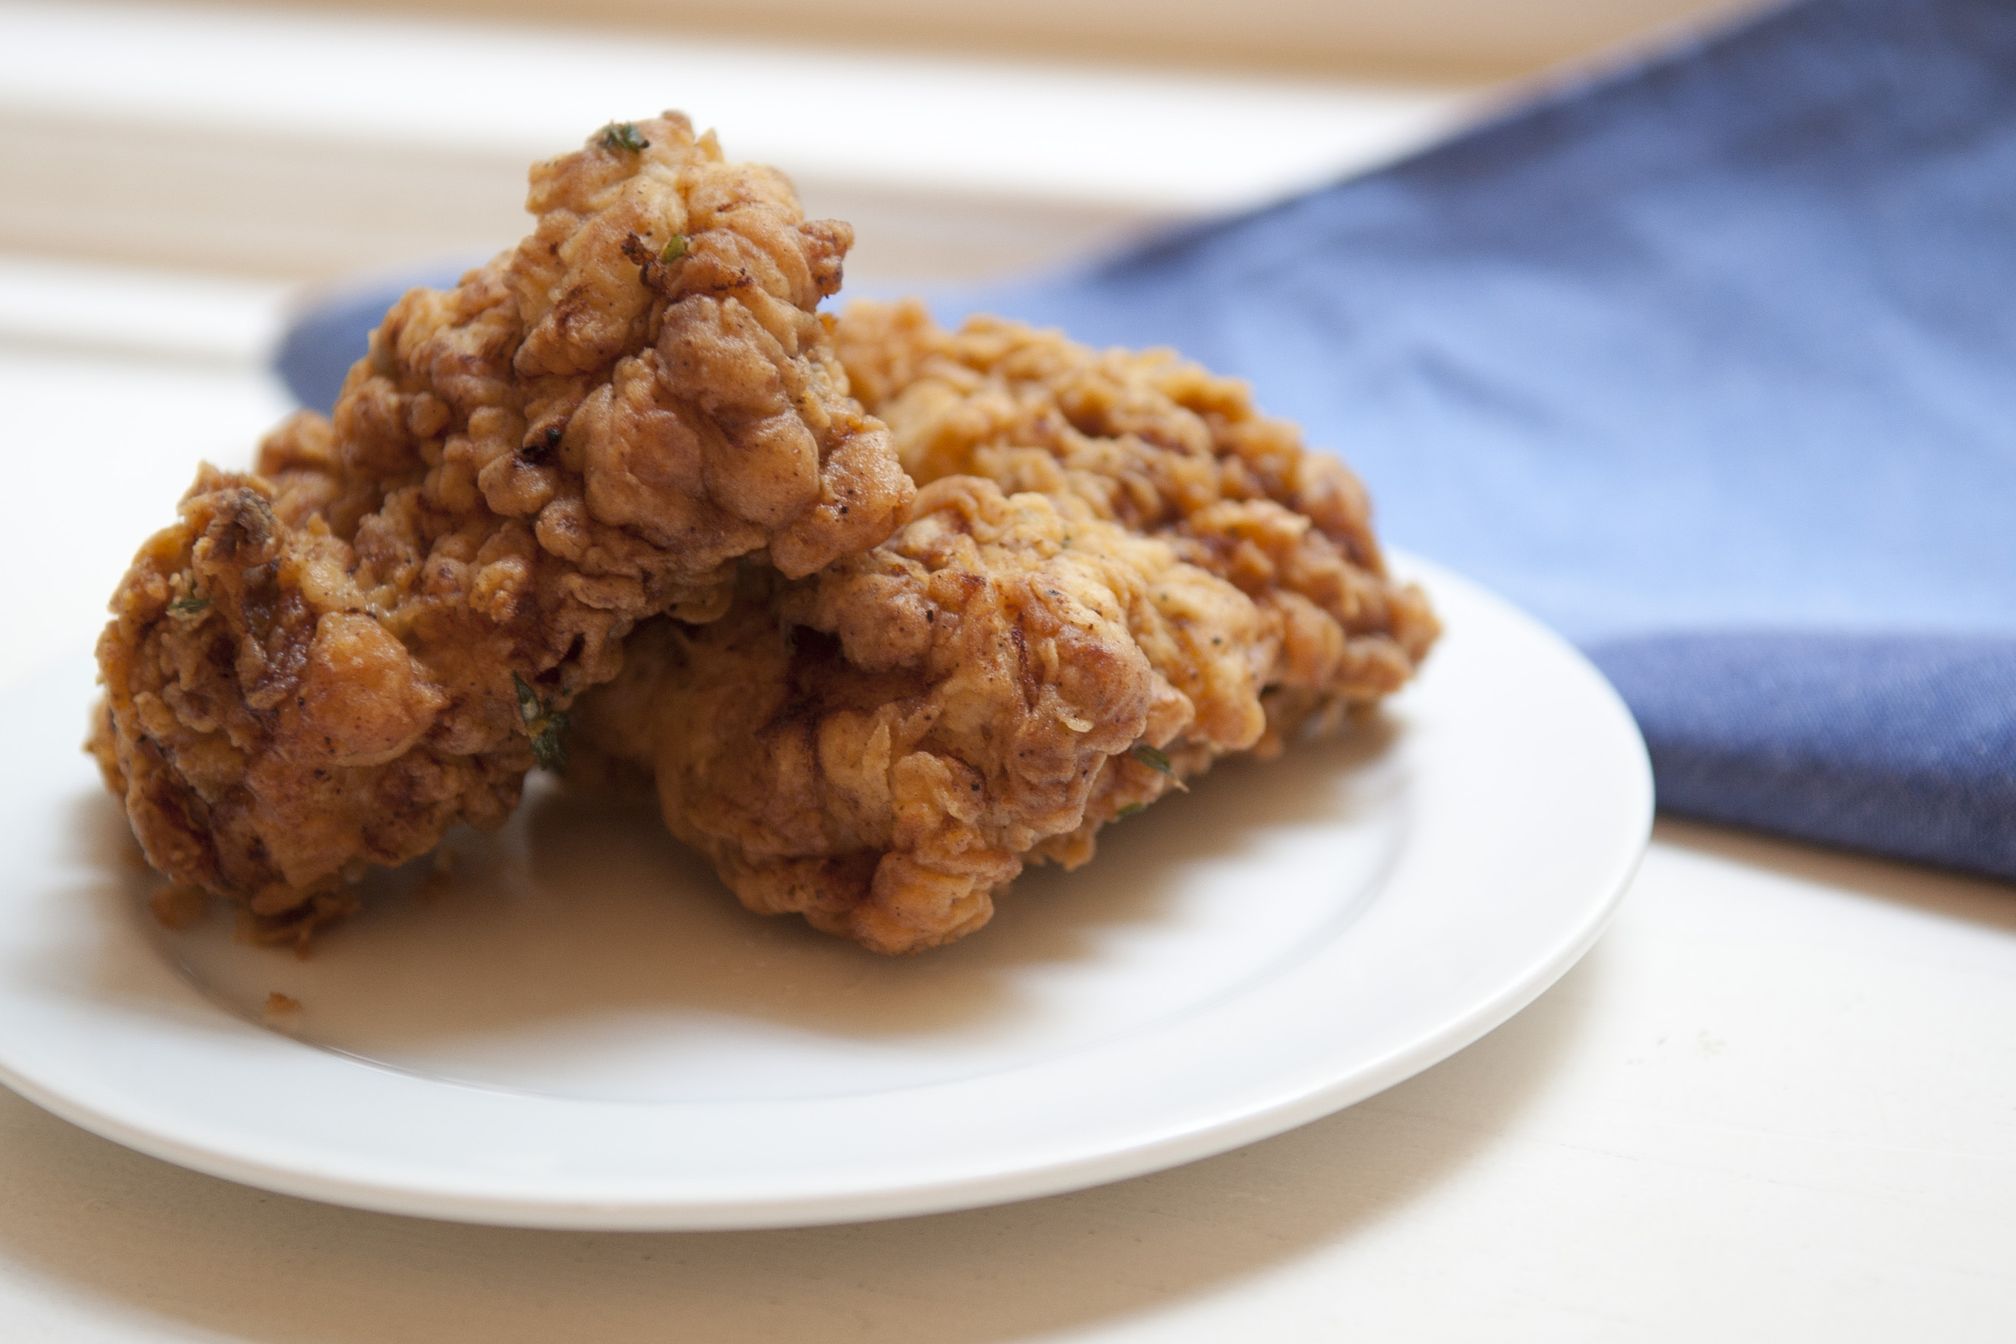 Fried Chicken Recipe On Food52,Nursing Jobs From Home Near Me